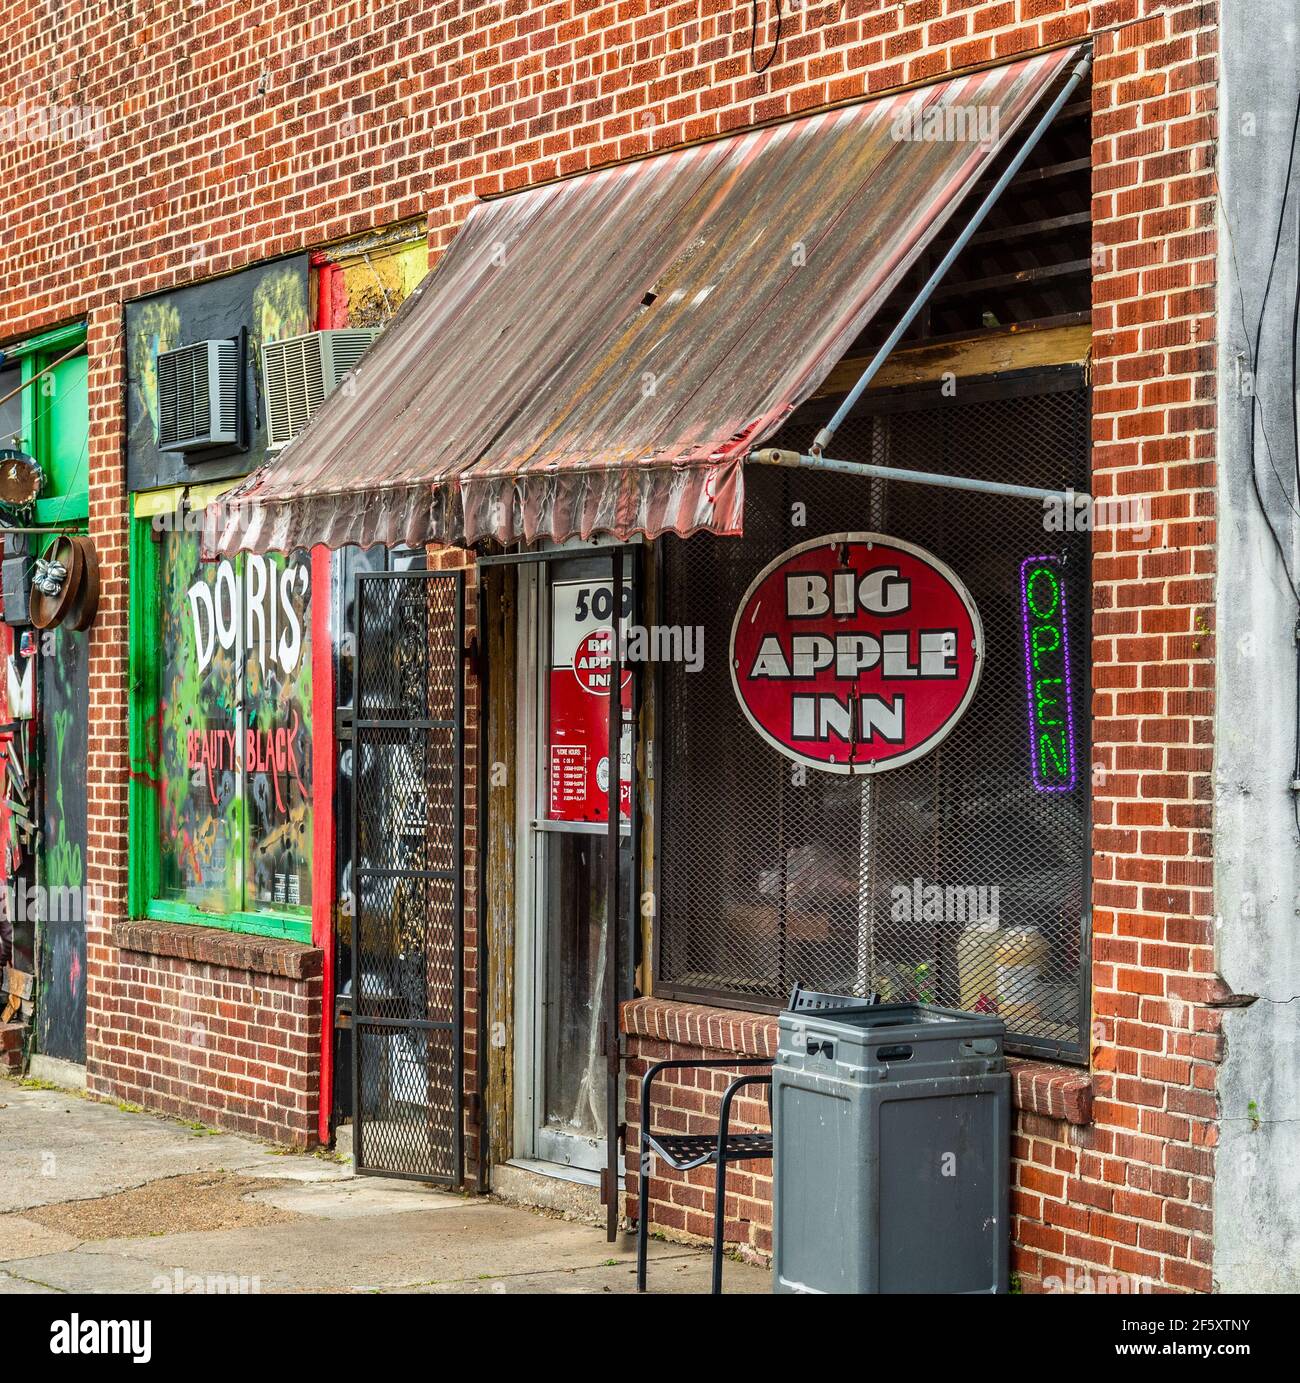 Big Apple Inn on Farish Street famous for pig’s ear sandwiches and as a gathering place during the Civil Rights Movement, Jackson, Mississippi, USA. Stock Photo